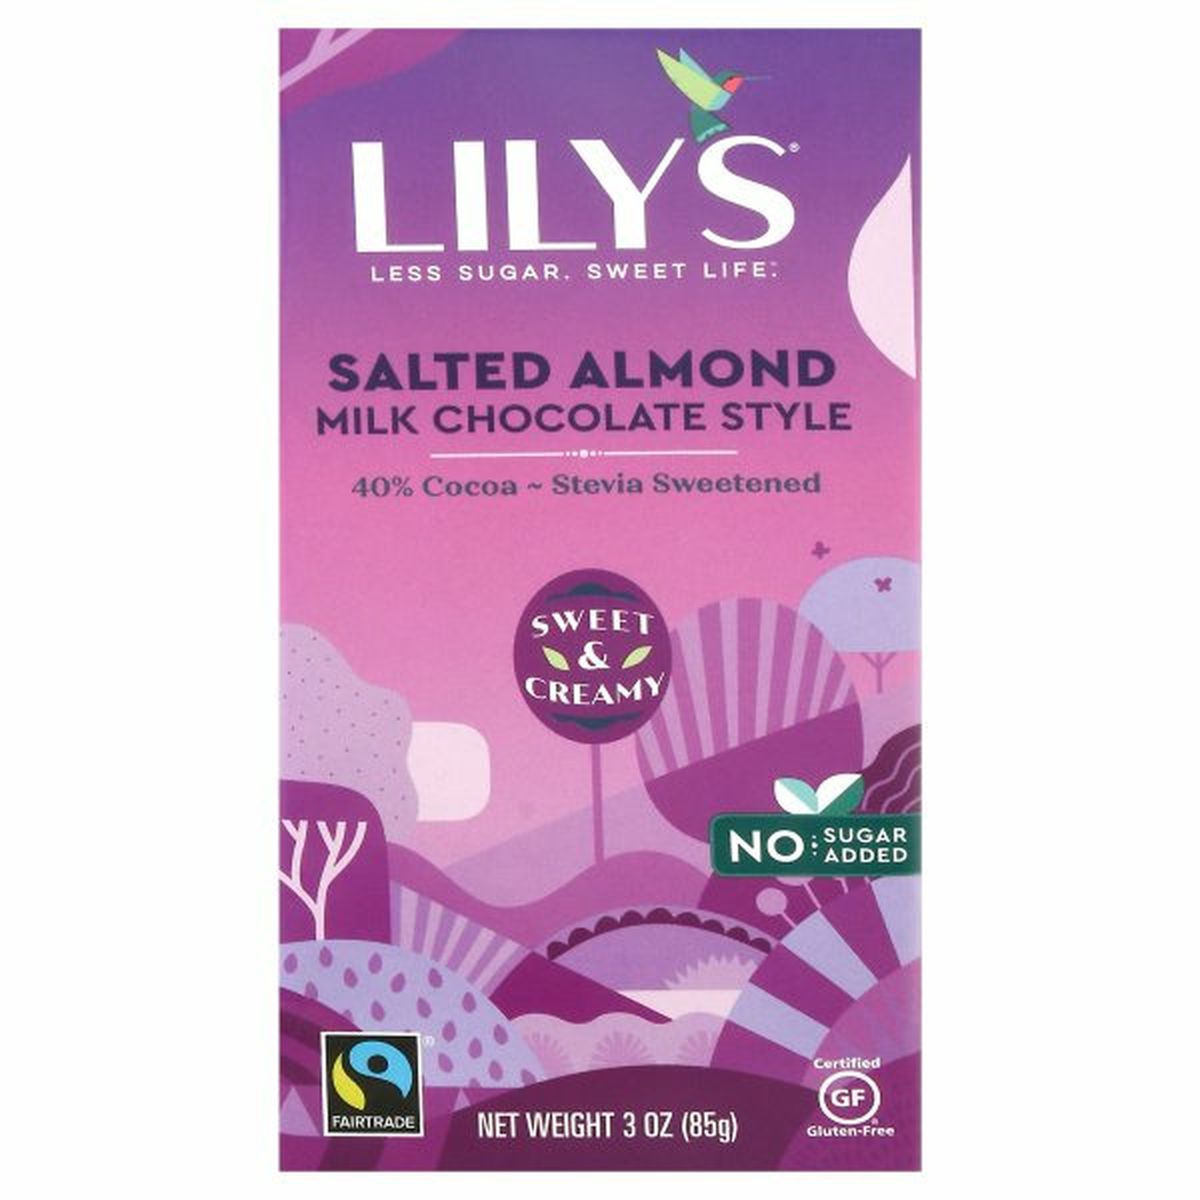 Calories in Lily's Milk Chocolate Style, Salted Almond, 40% Cocoa